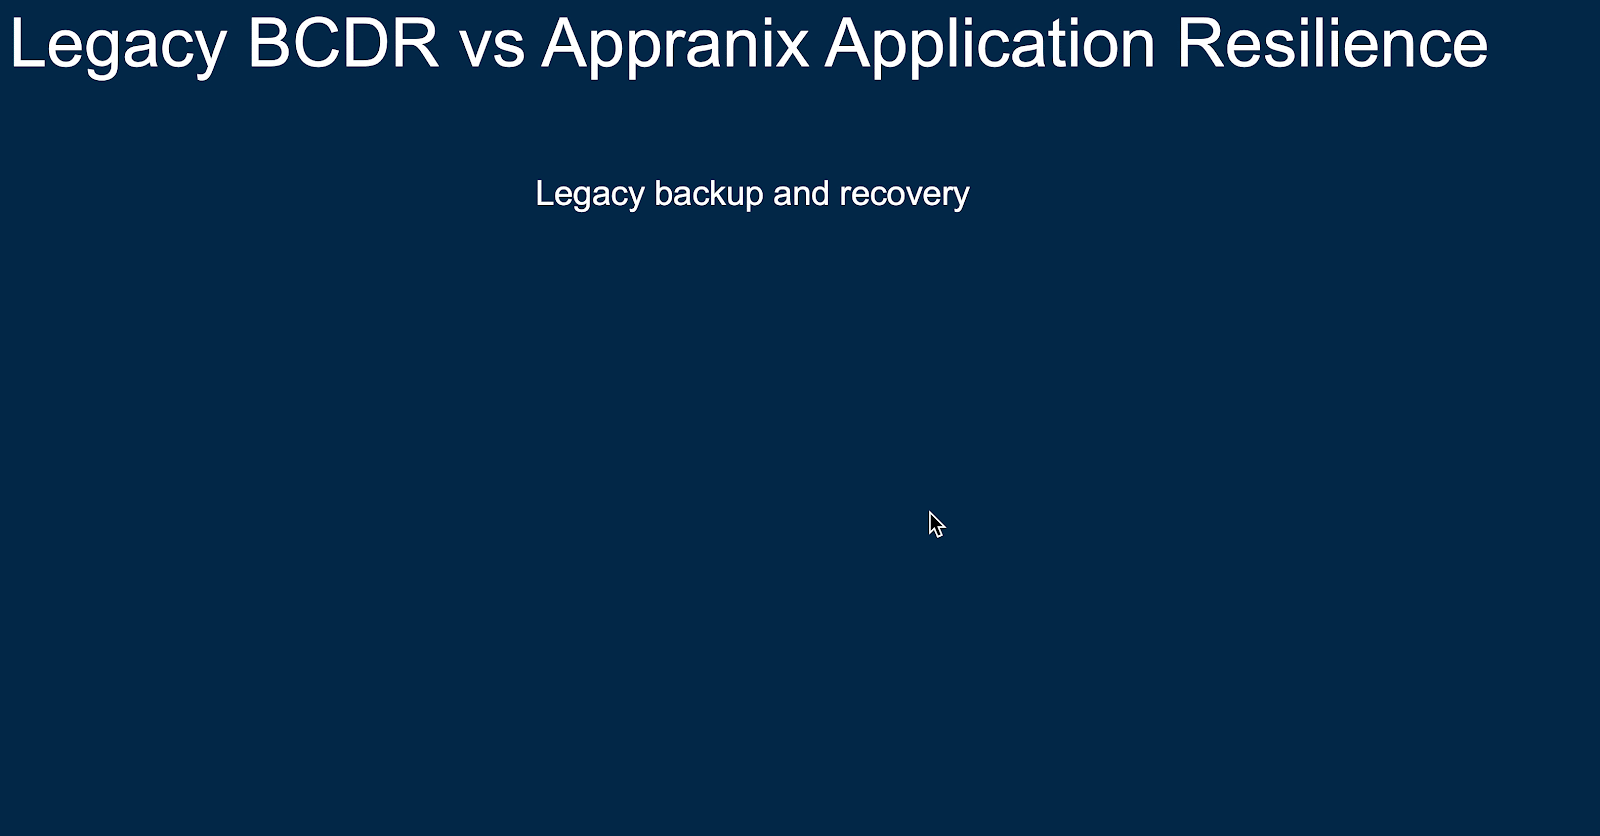 Legacy BCDR vs Appranix Application Resilience